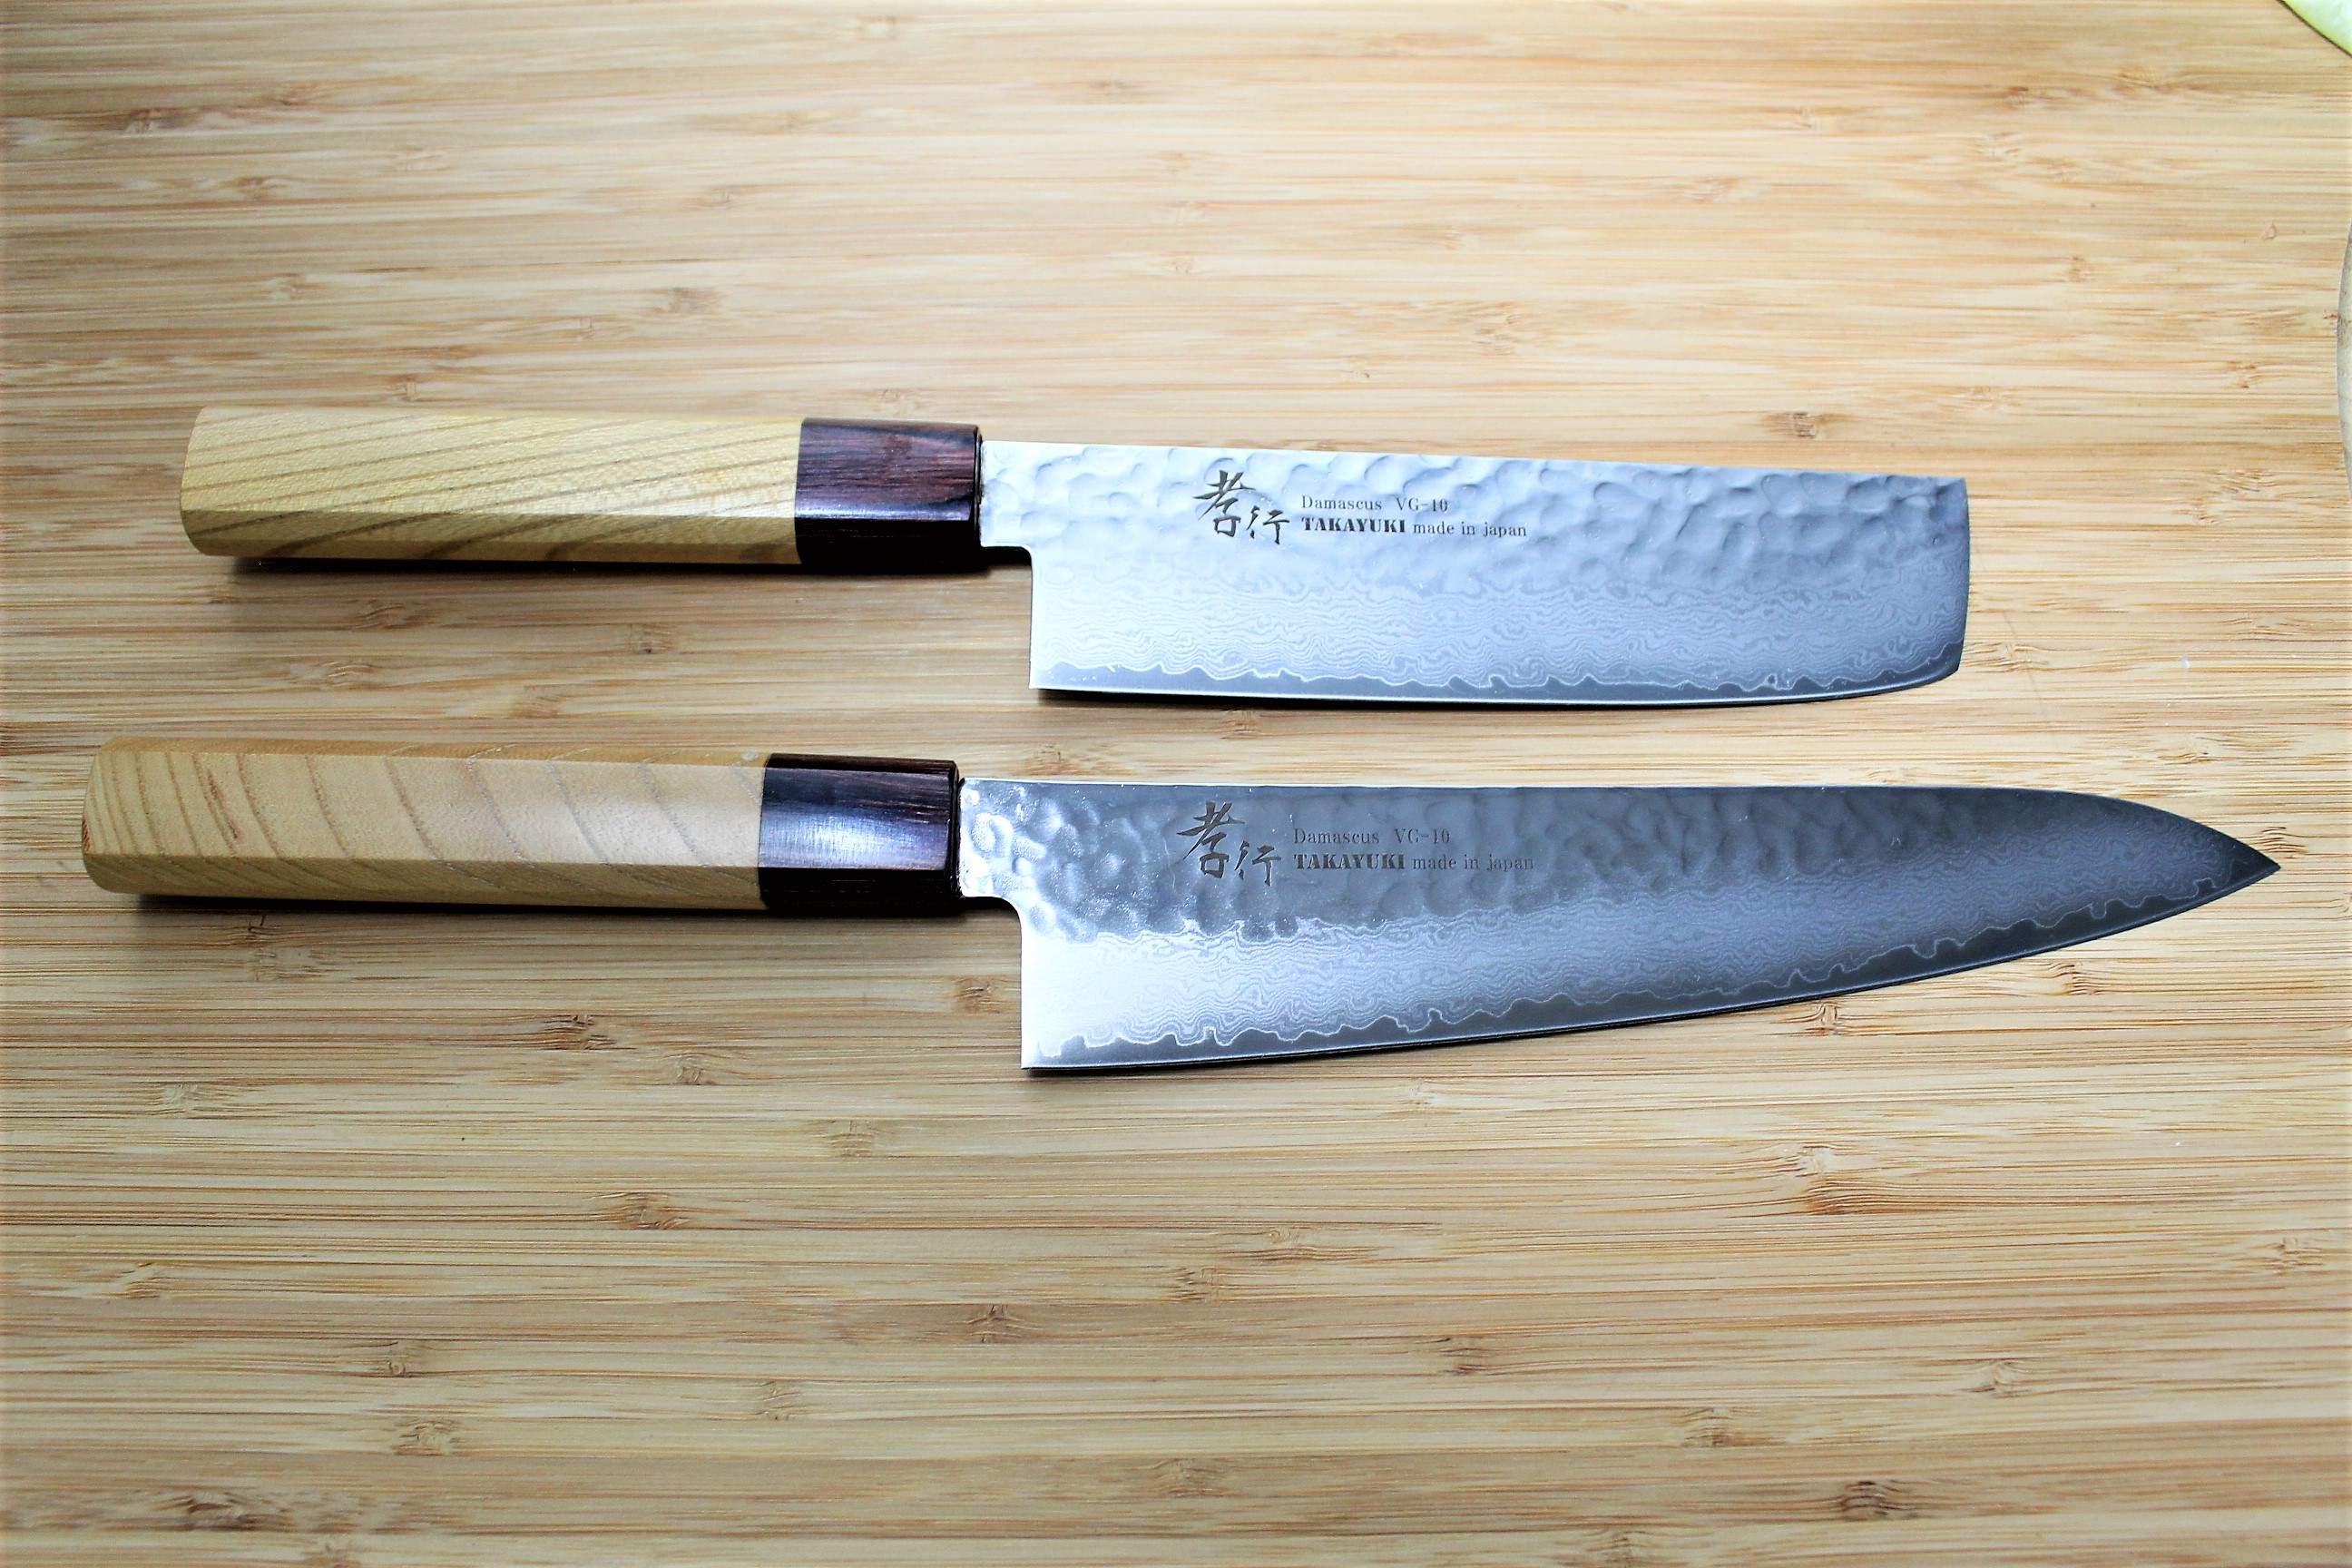 Why are Japanese Knife Handles Made Out of Wood?